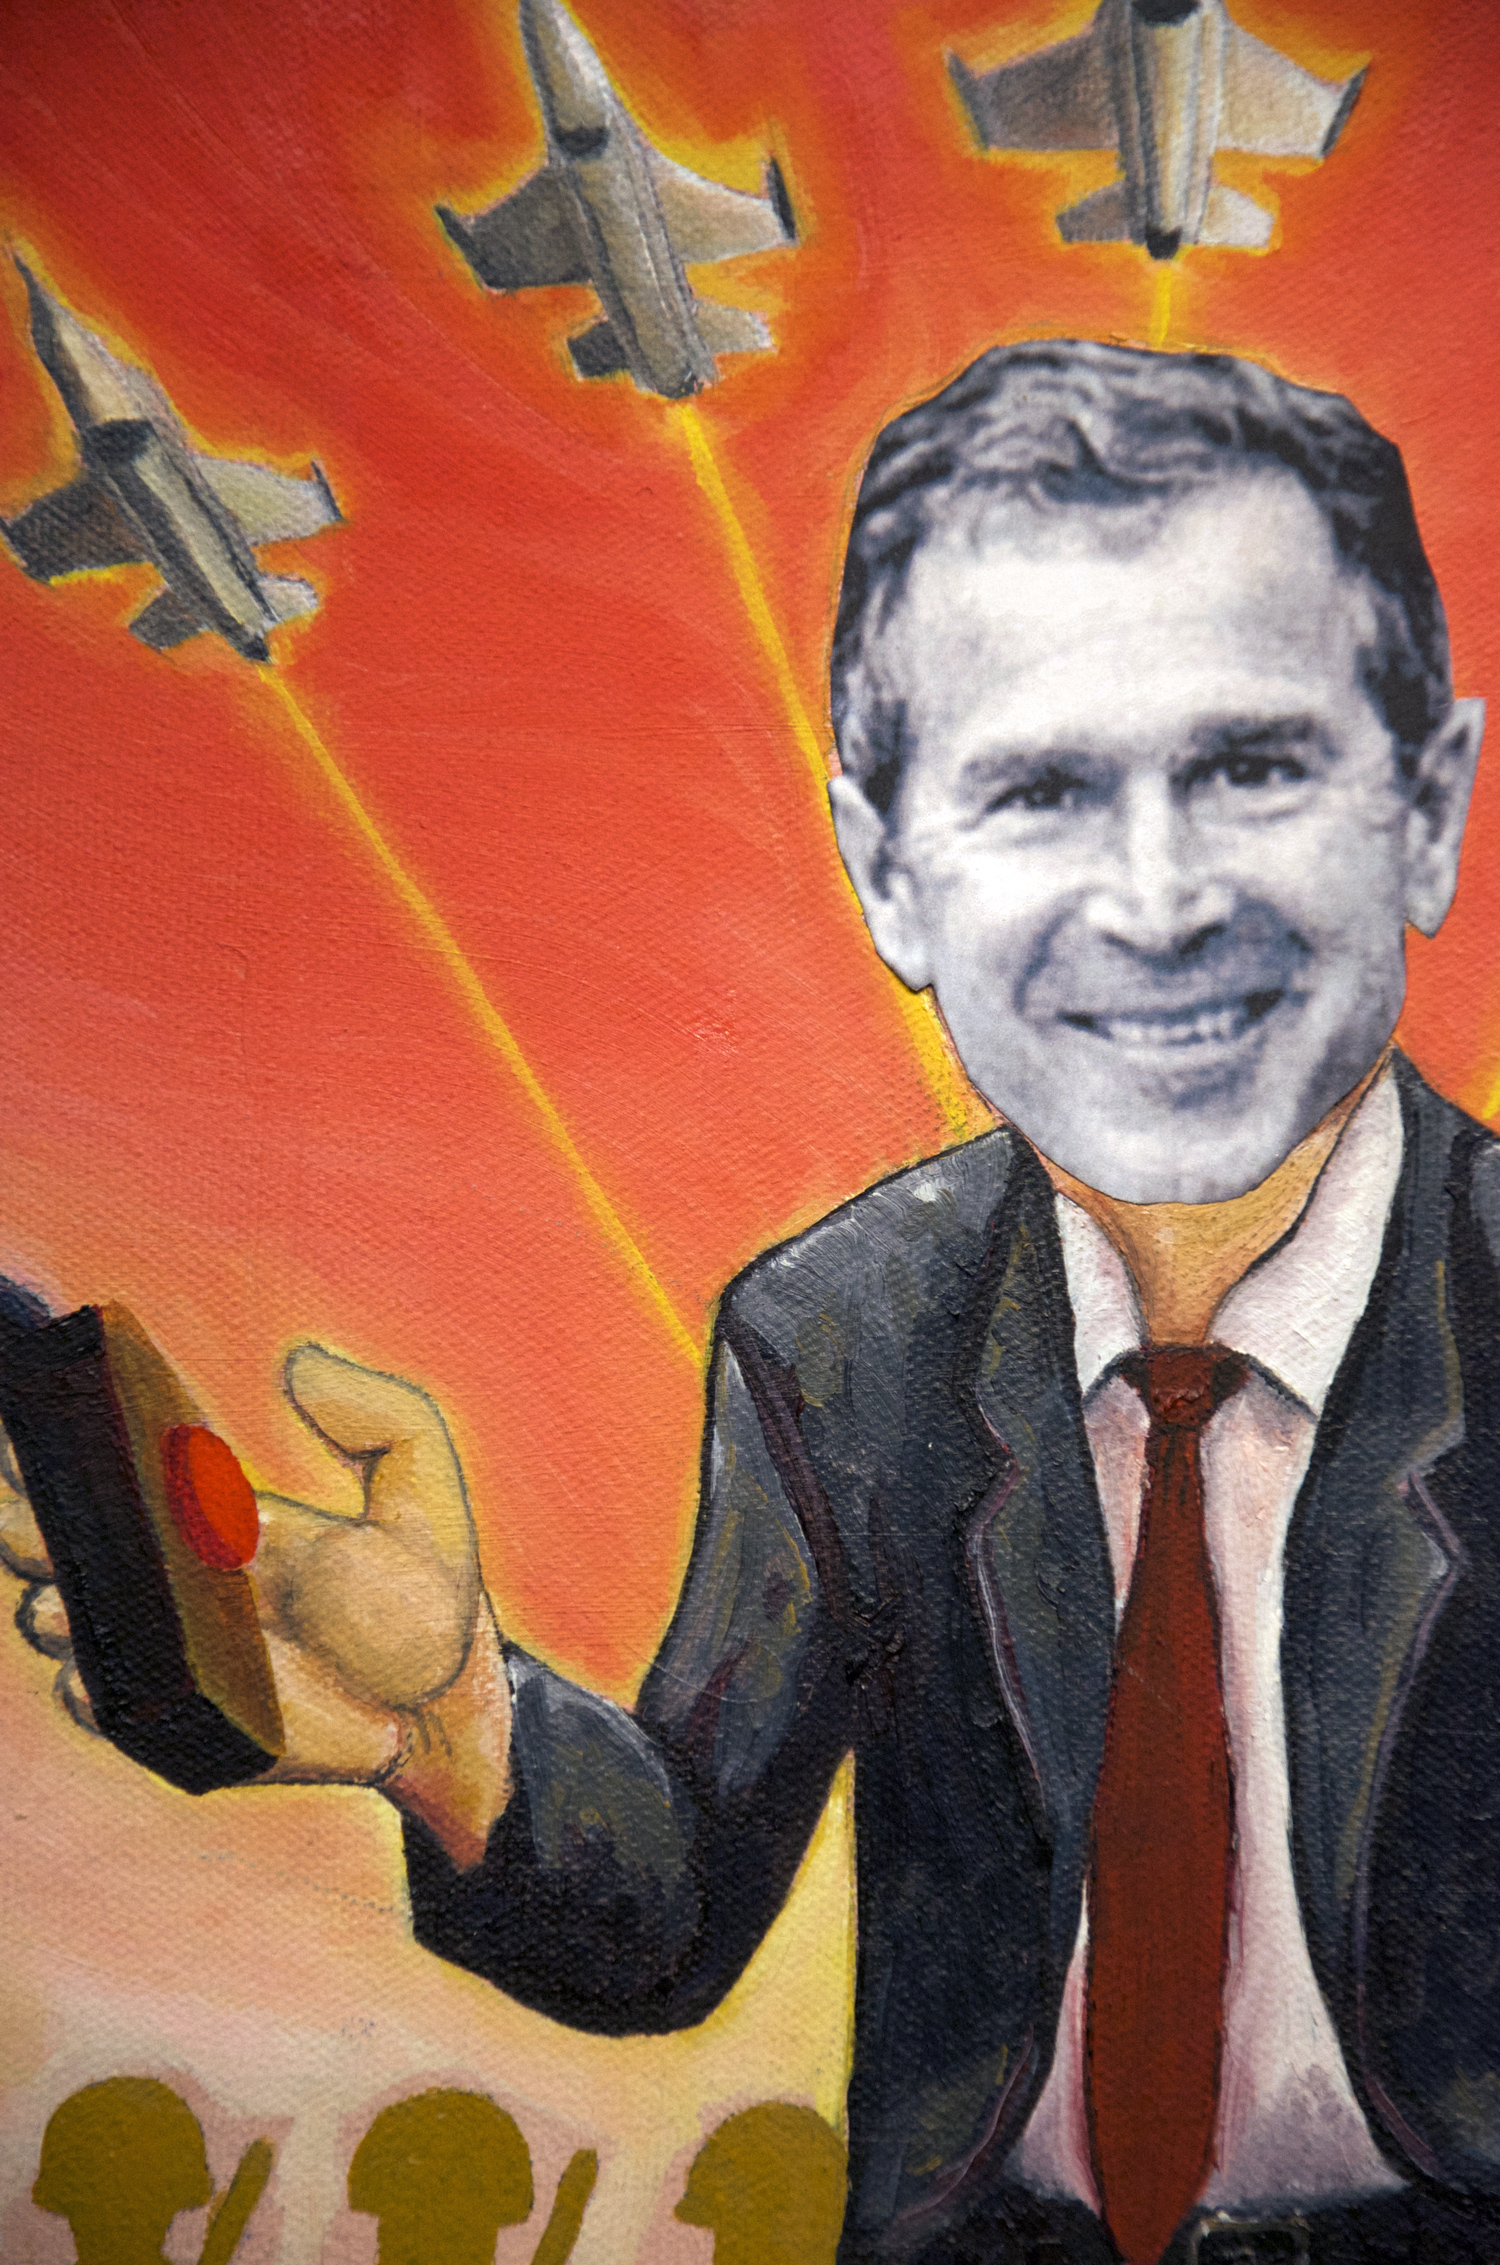 No Guns No Glory oil painting (GW Bush political satire), by Billy Reiter